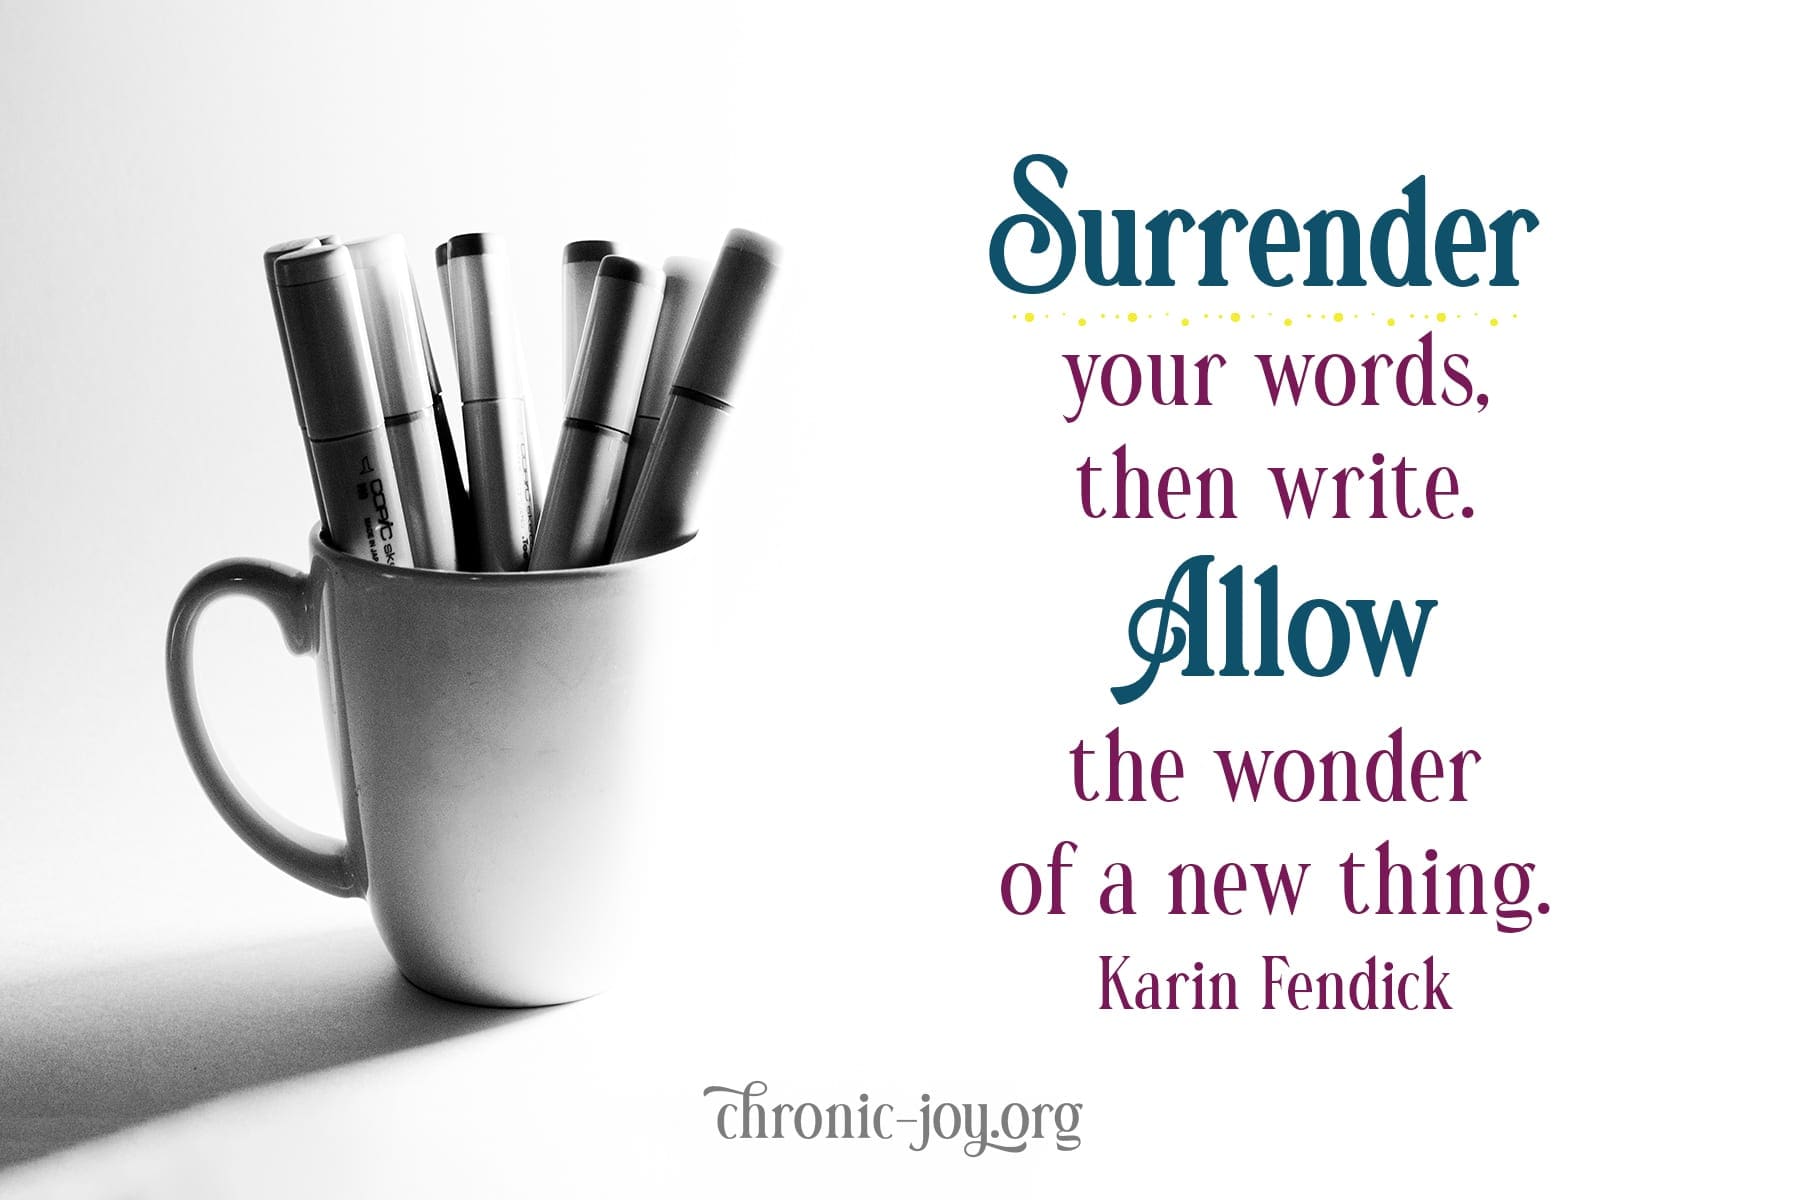 "Surrender your words, then write. Allow the wonder of a new thing." Karin Fendick